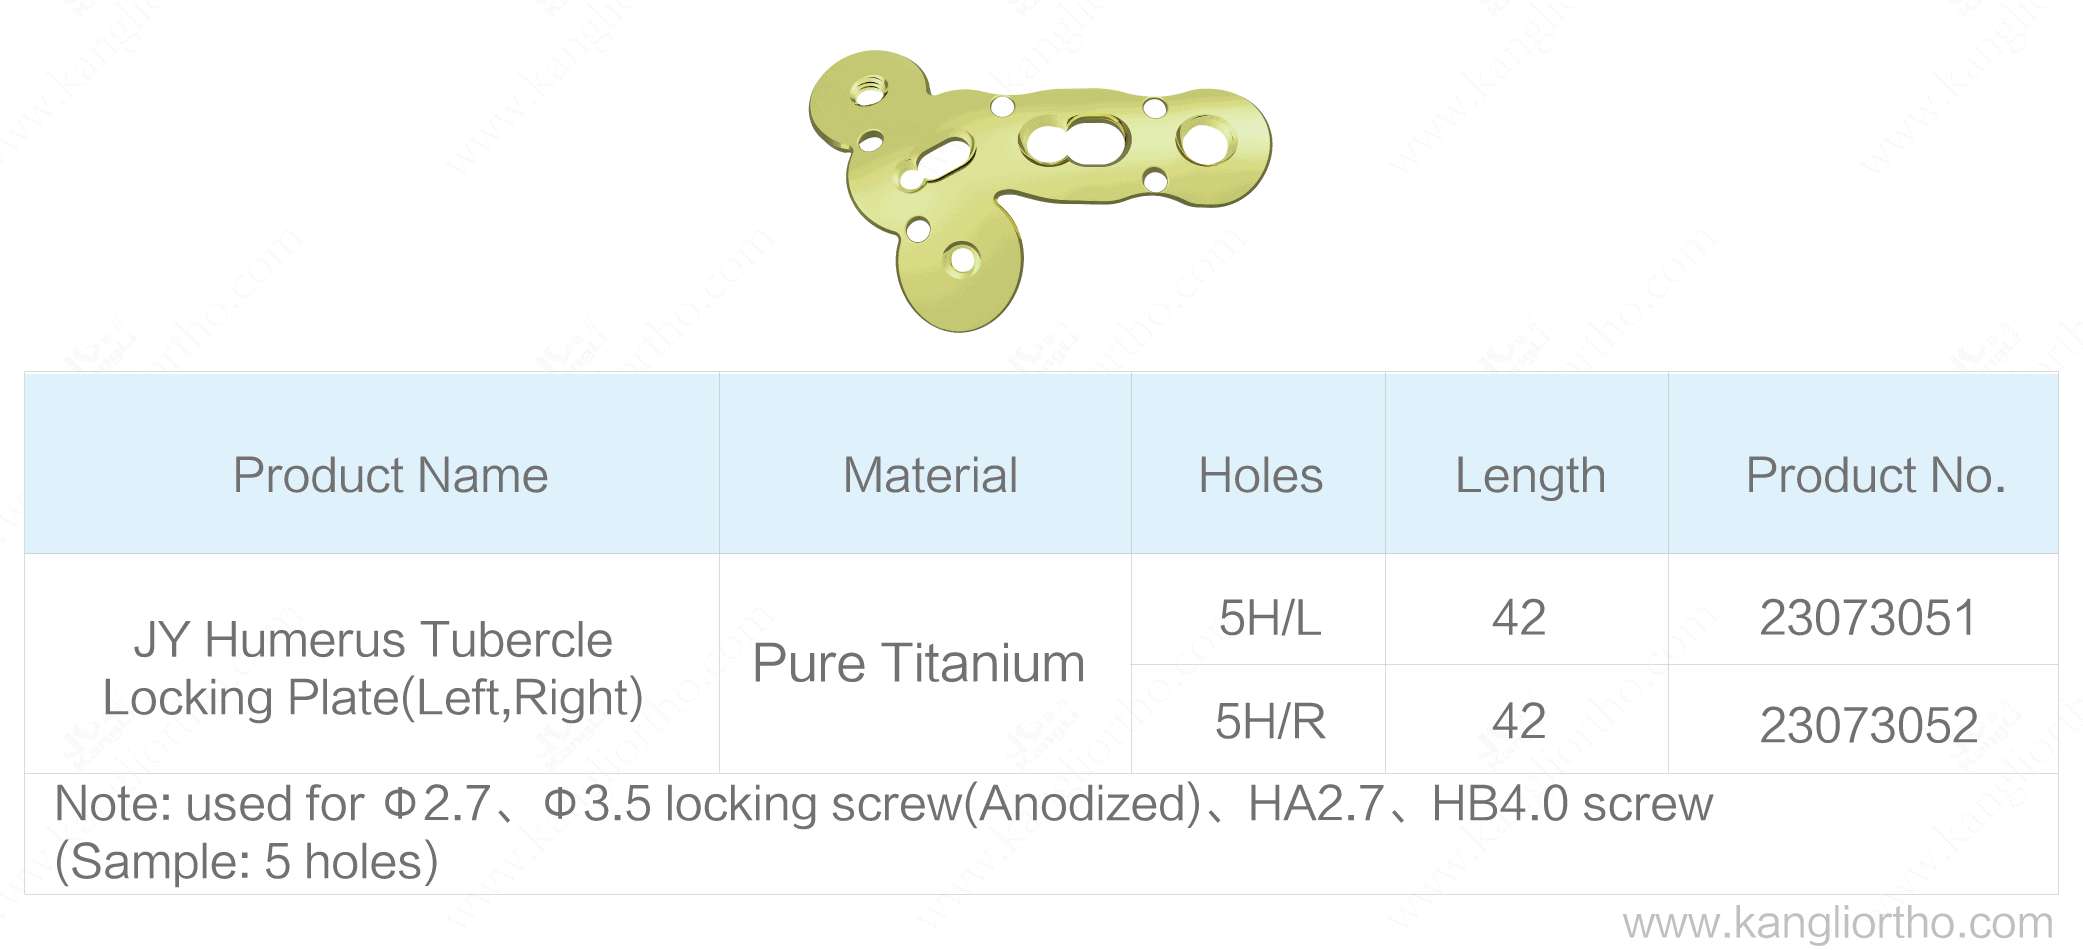 jy-humerus-tubercle-locking-plate-specifications